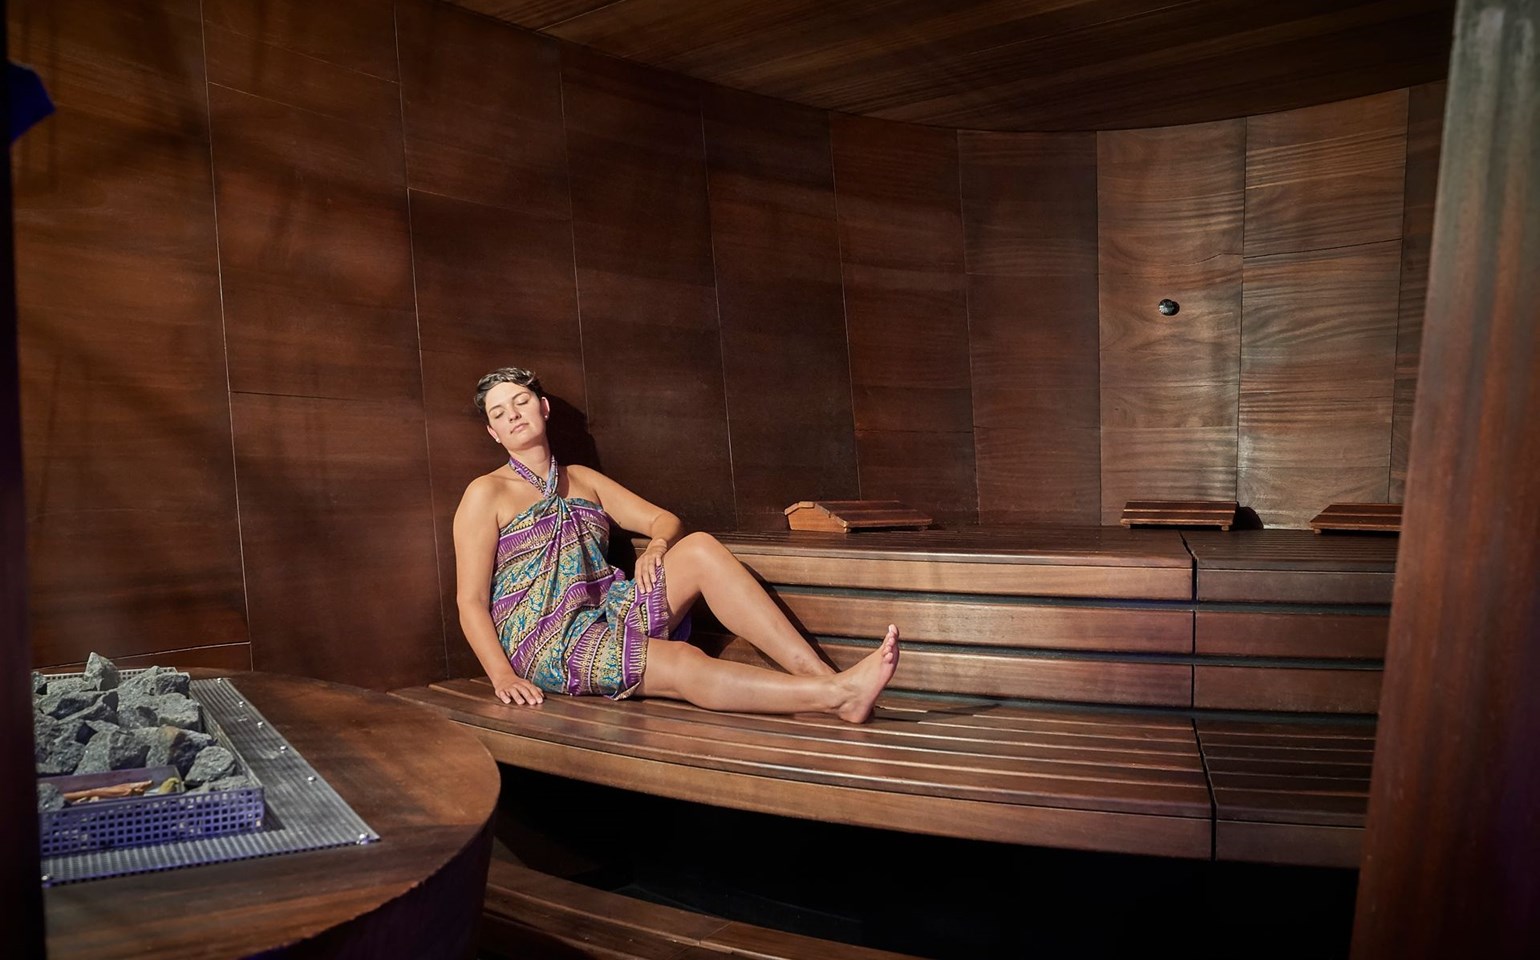 Our saunas in the Wellness Spa